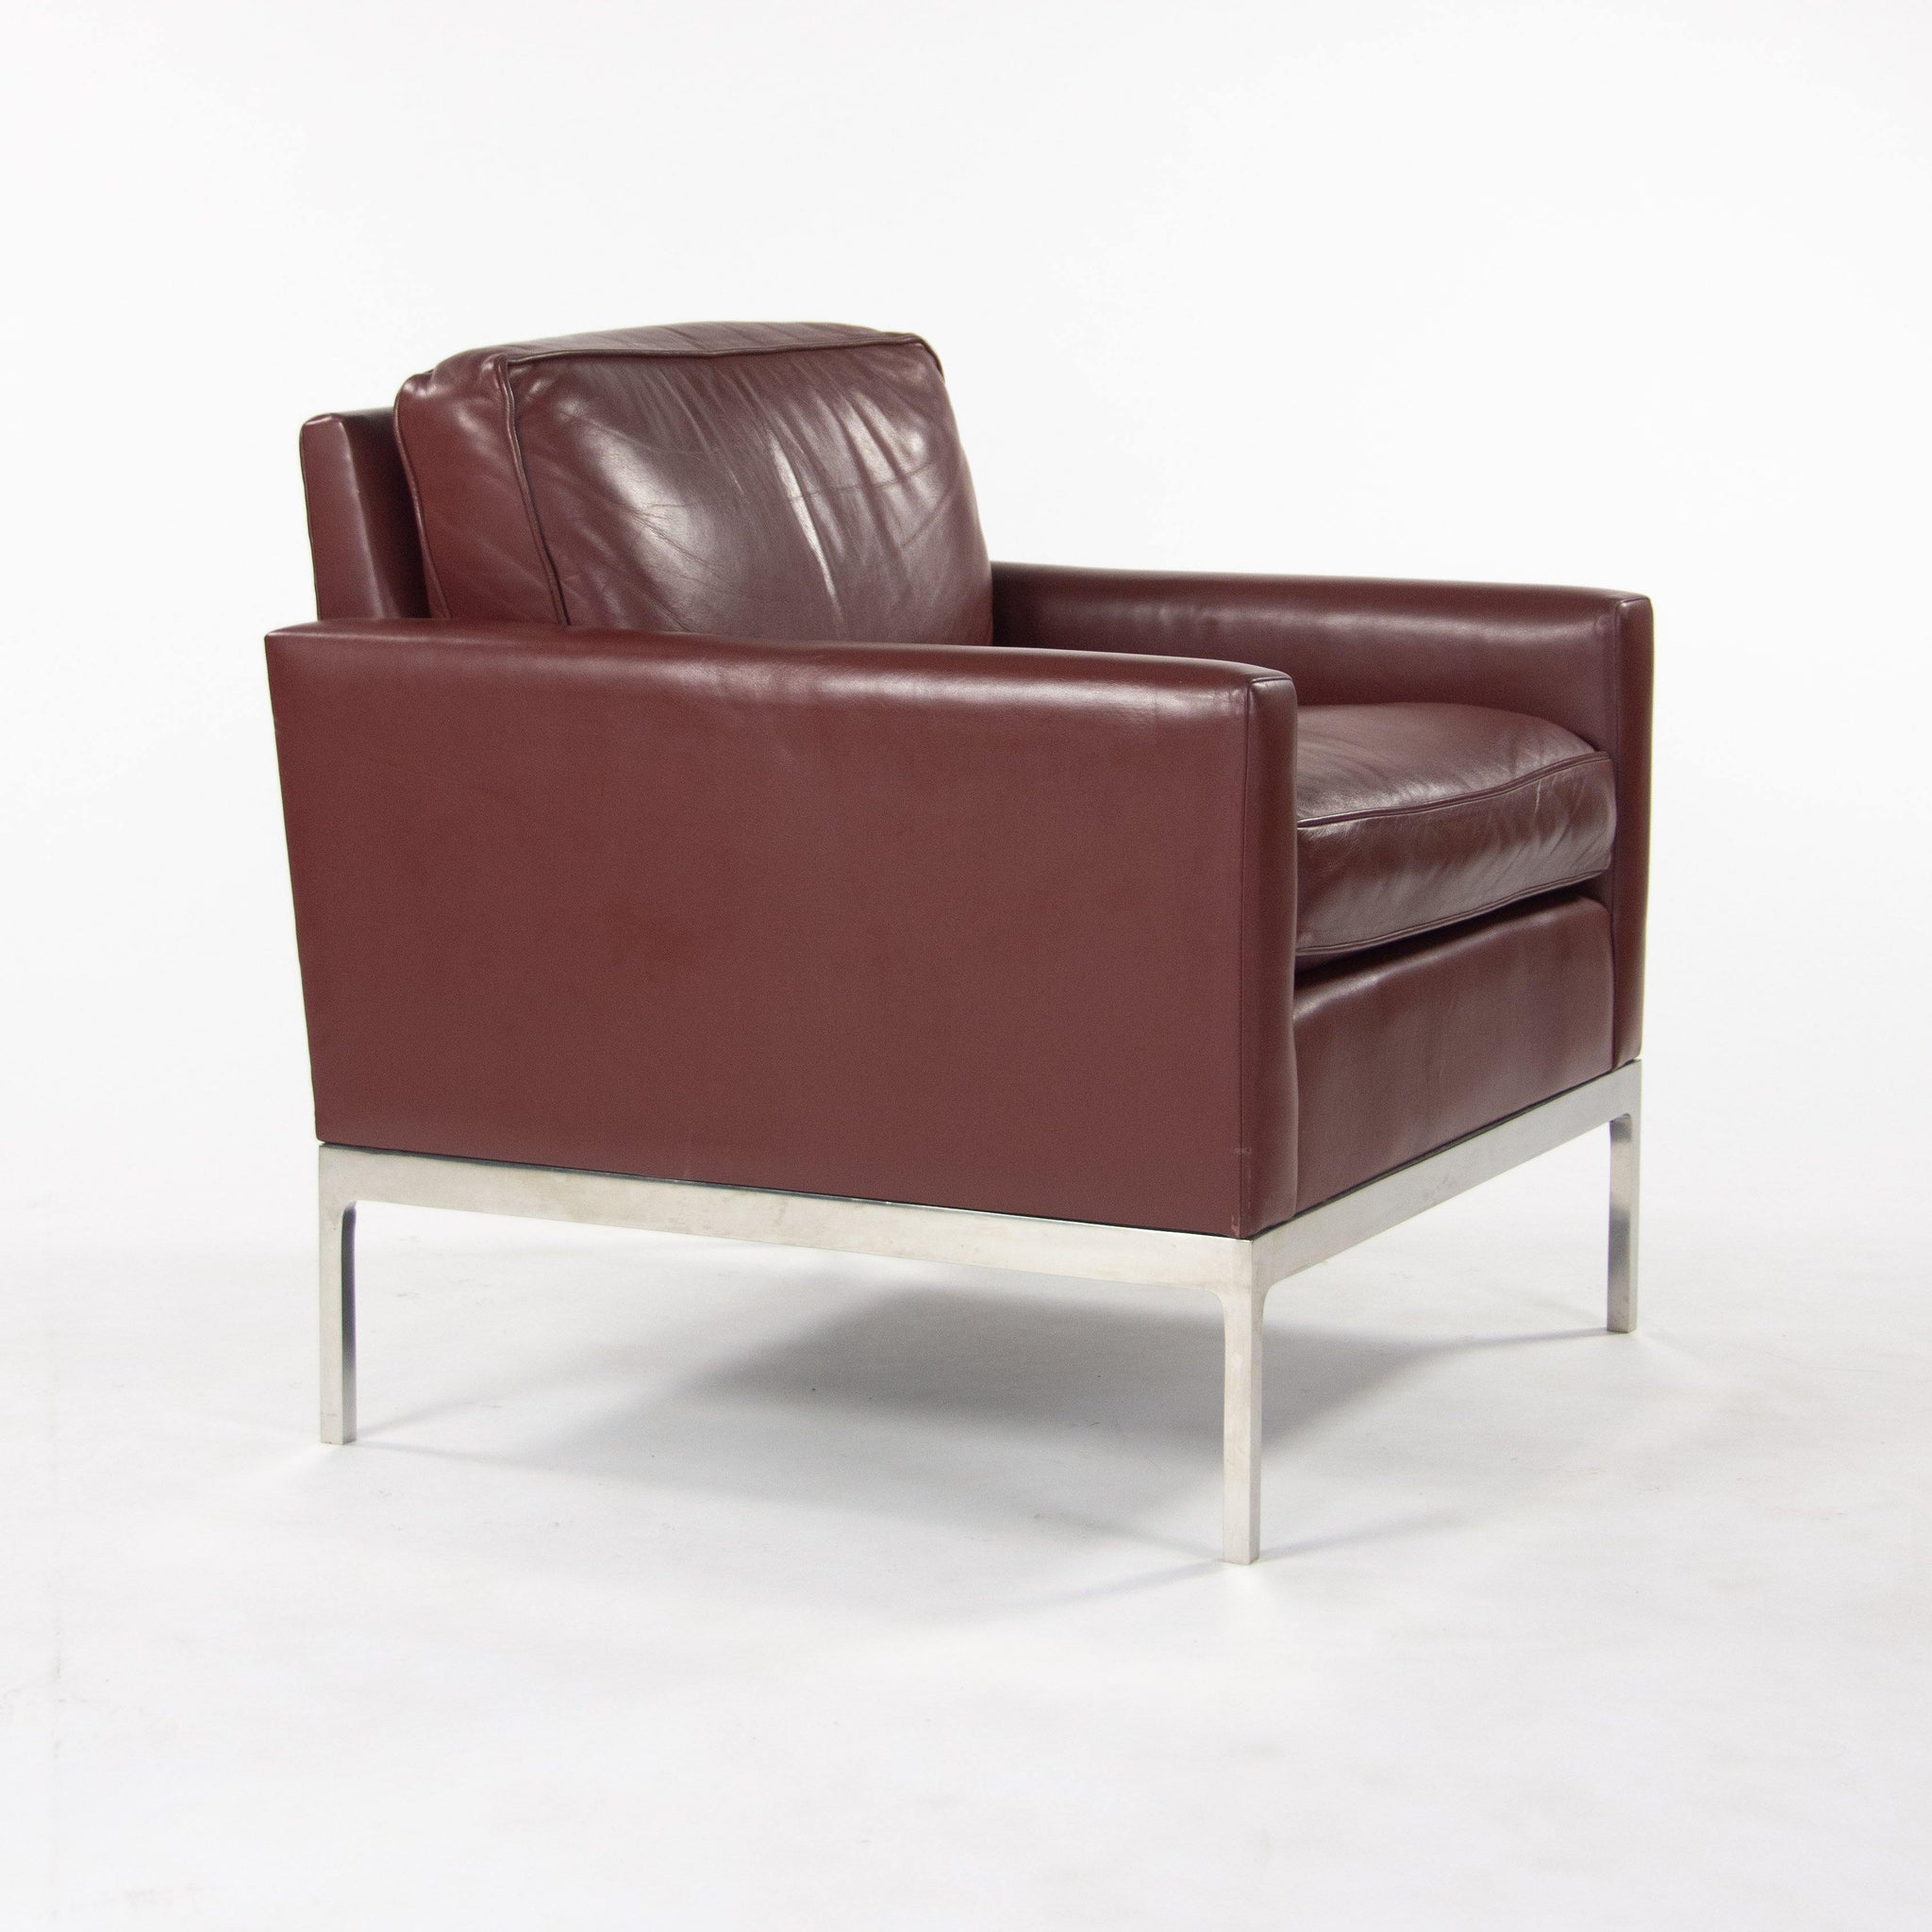 Nicos Zographos Red Leather 70 Club Chair Armchair with Polished Stainless Legs - Rarify Inc.